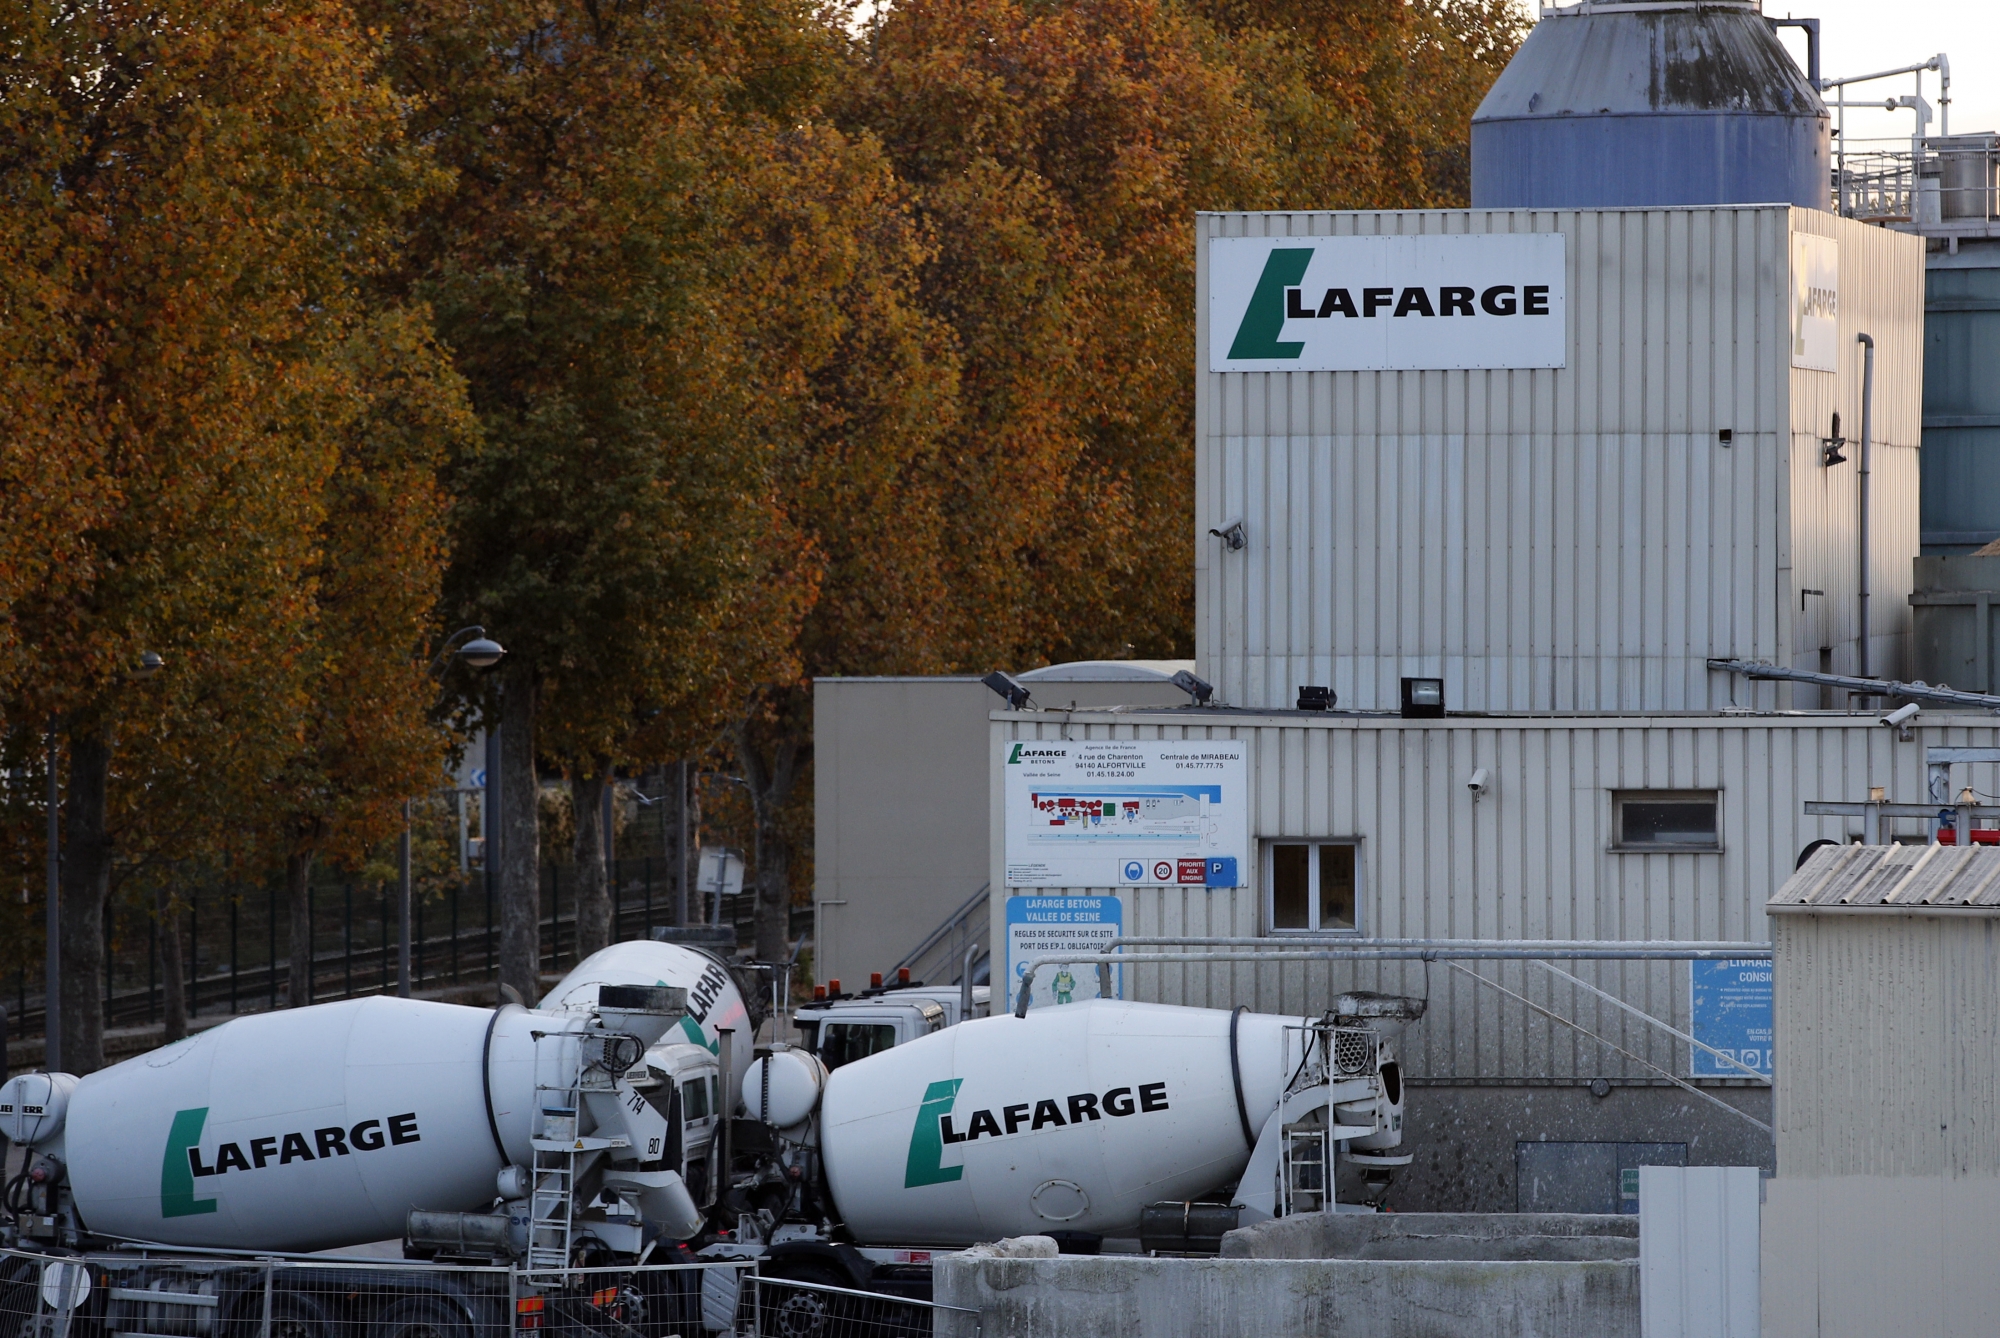 A site of cement maker Lafarge is pictured in Paris, Tuesday, Nov. 14, 2017. French investigators are searching the French offices of LafargeHolcim, the world's largest cement maker, as part of an investigation into the group's deals with armed groups in Syria. (AP Photo/Christophe Ena) France Lafarge Syria